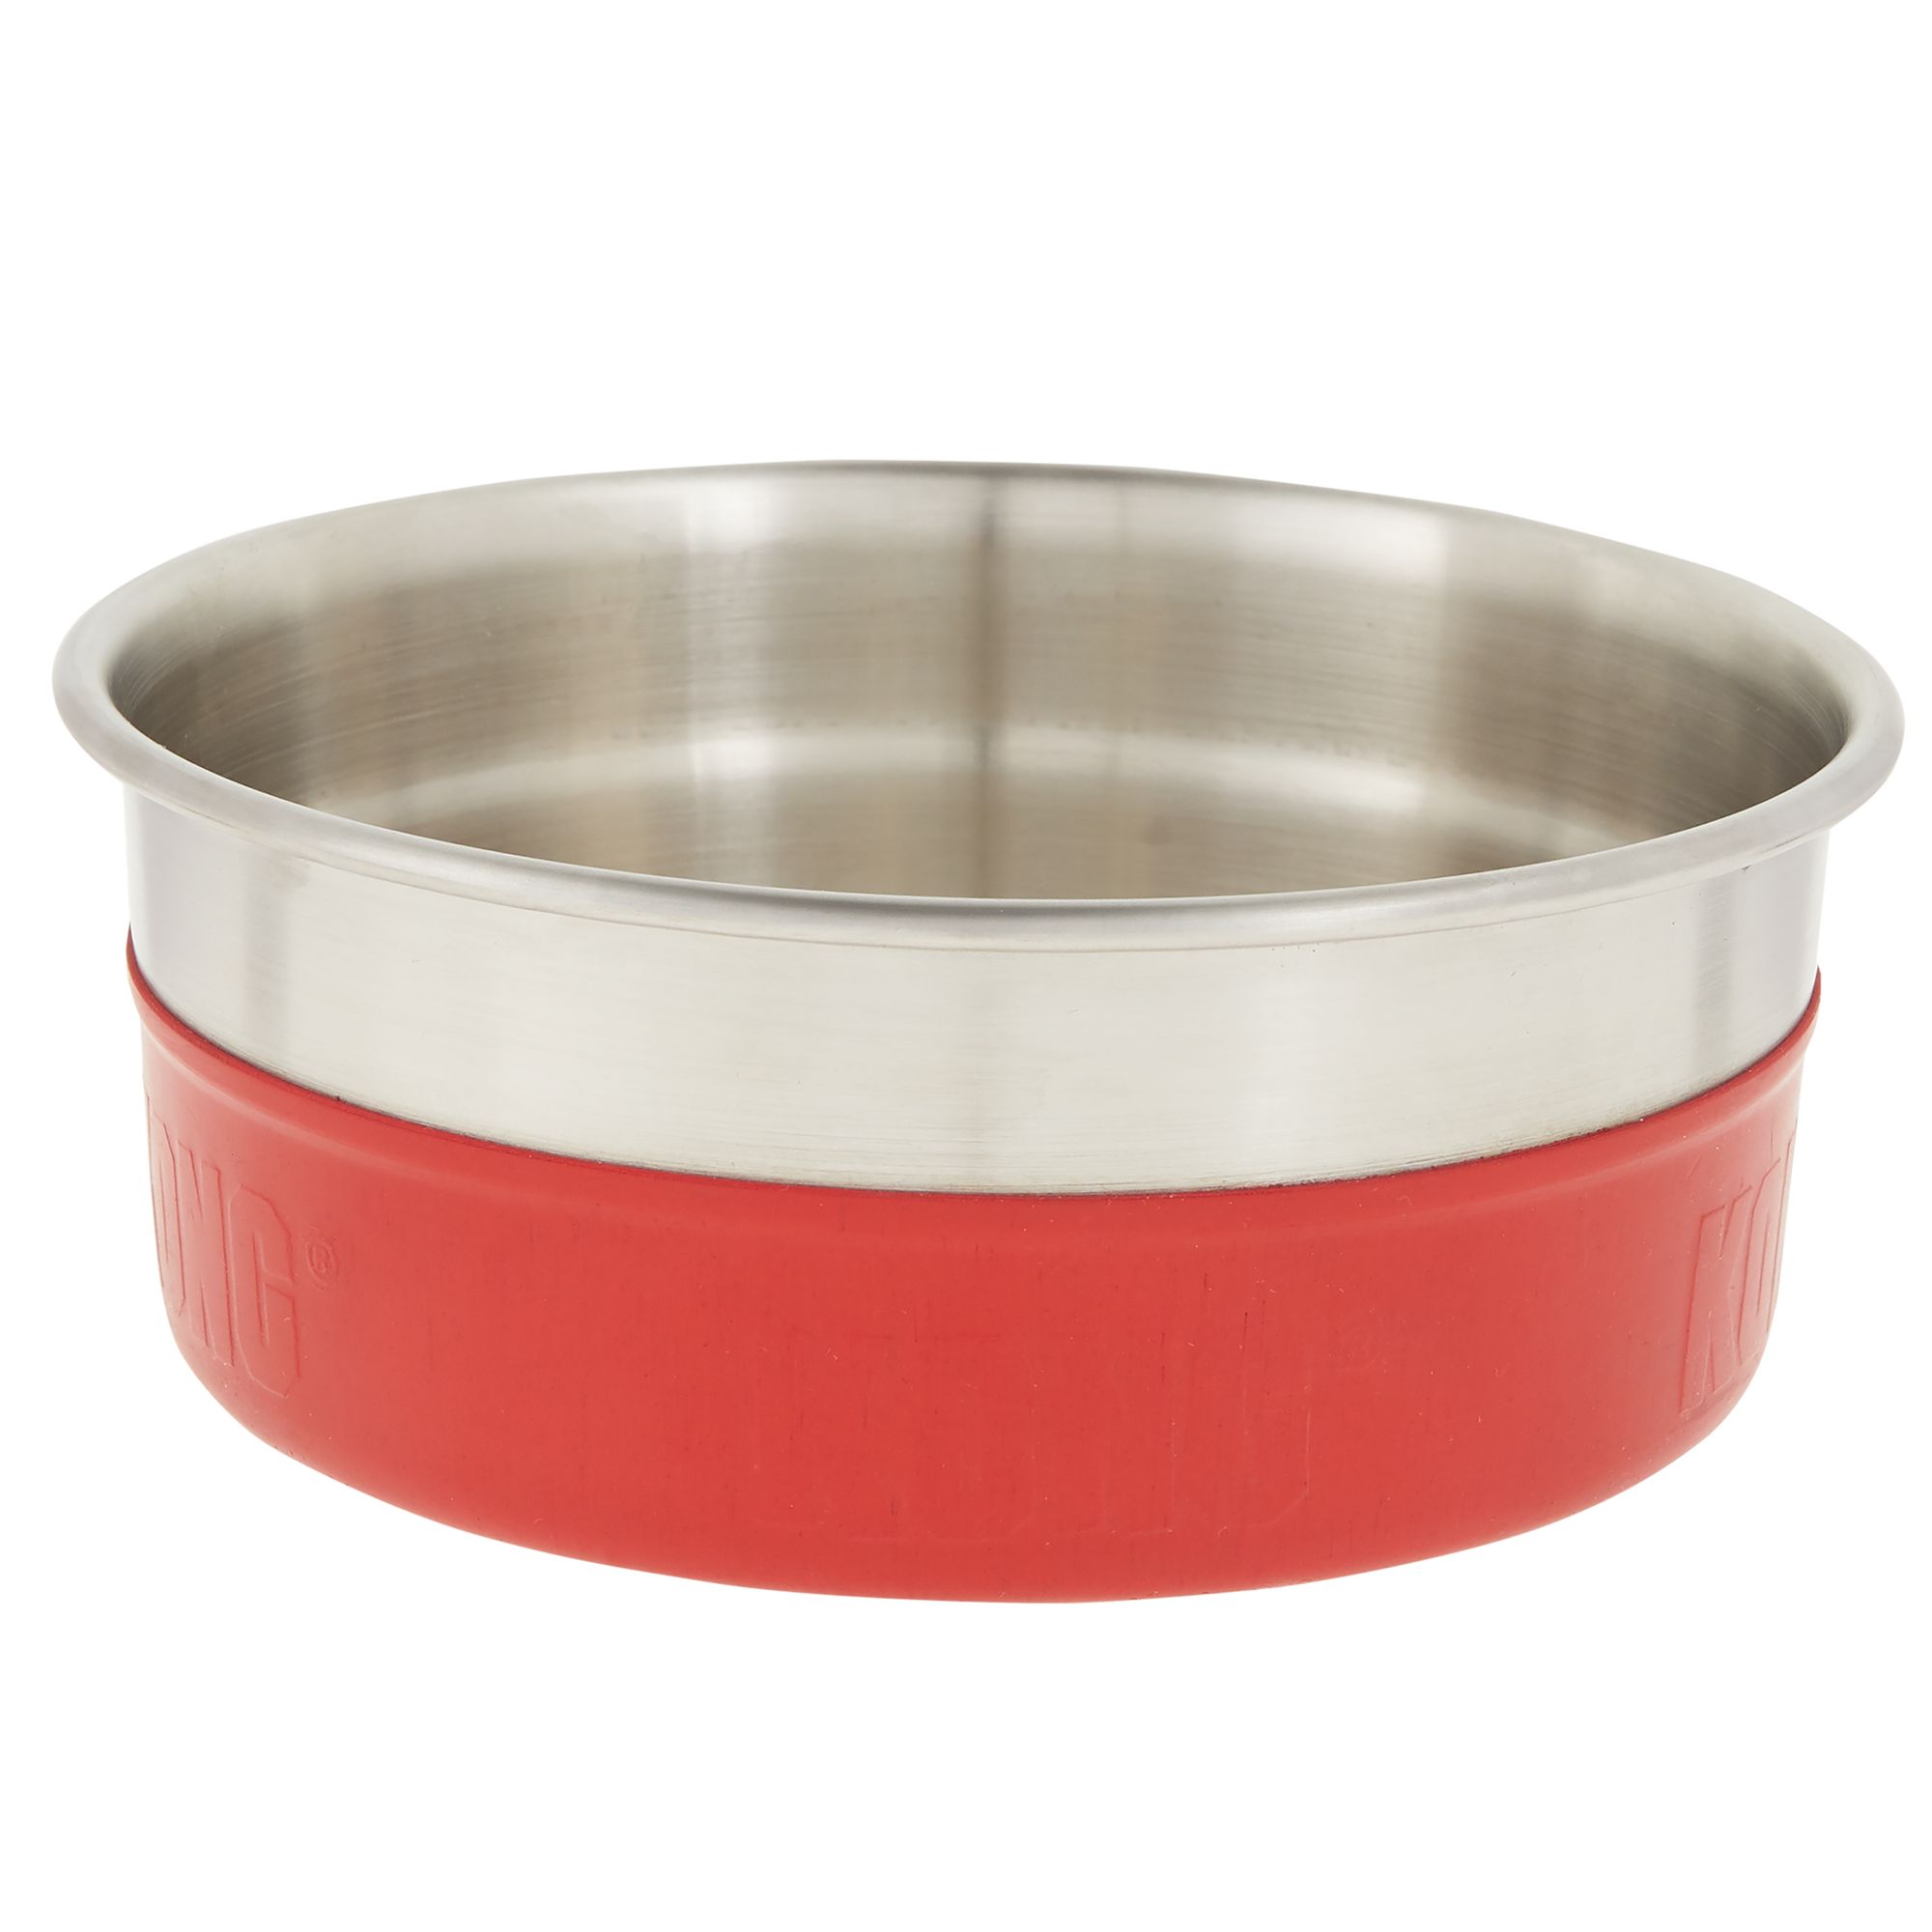 rubber water bowls